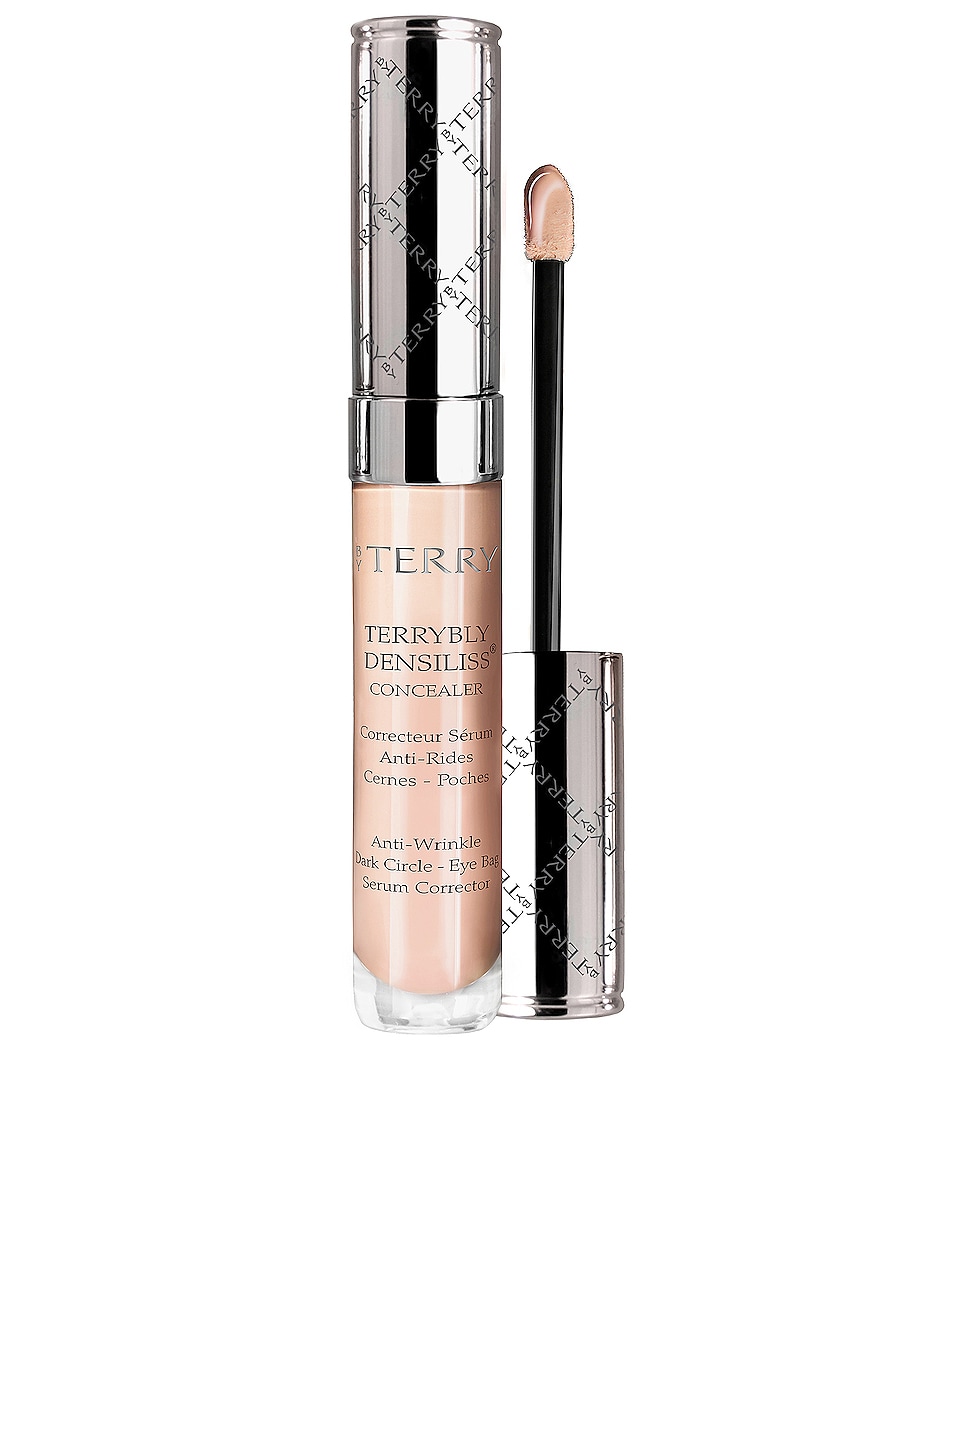 Консилер By Terry Terrybly Densiliss, цвет Fresh Fair by terry консилер terrybly densiliss concealer оттенок 4 medium peach